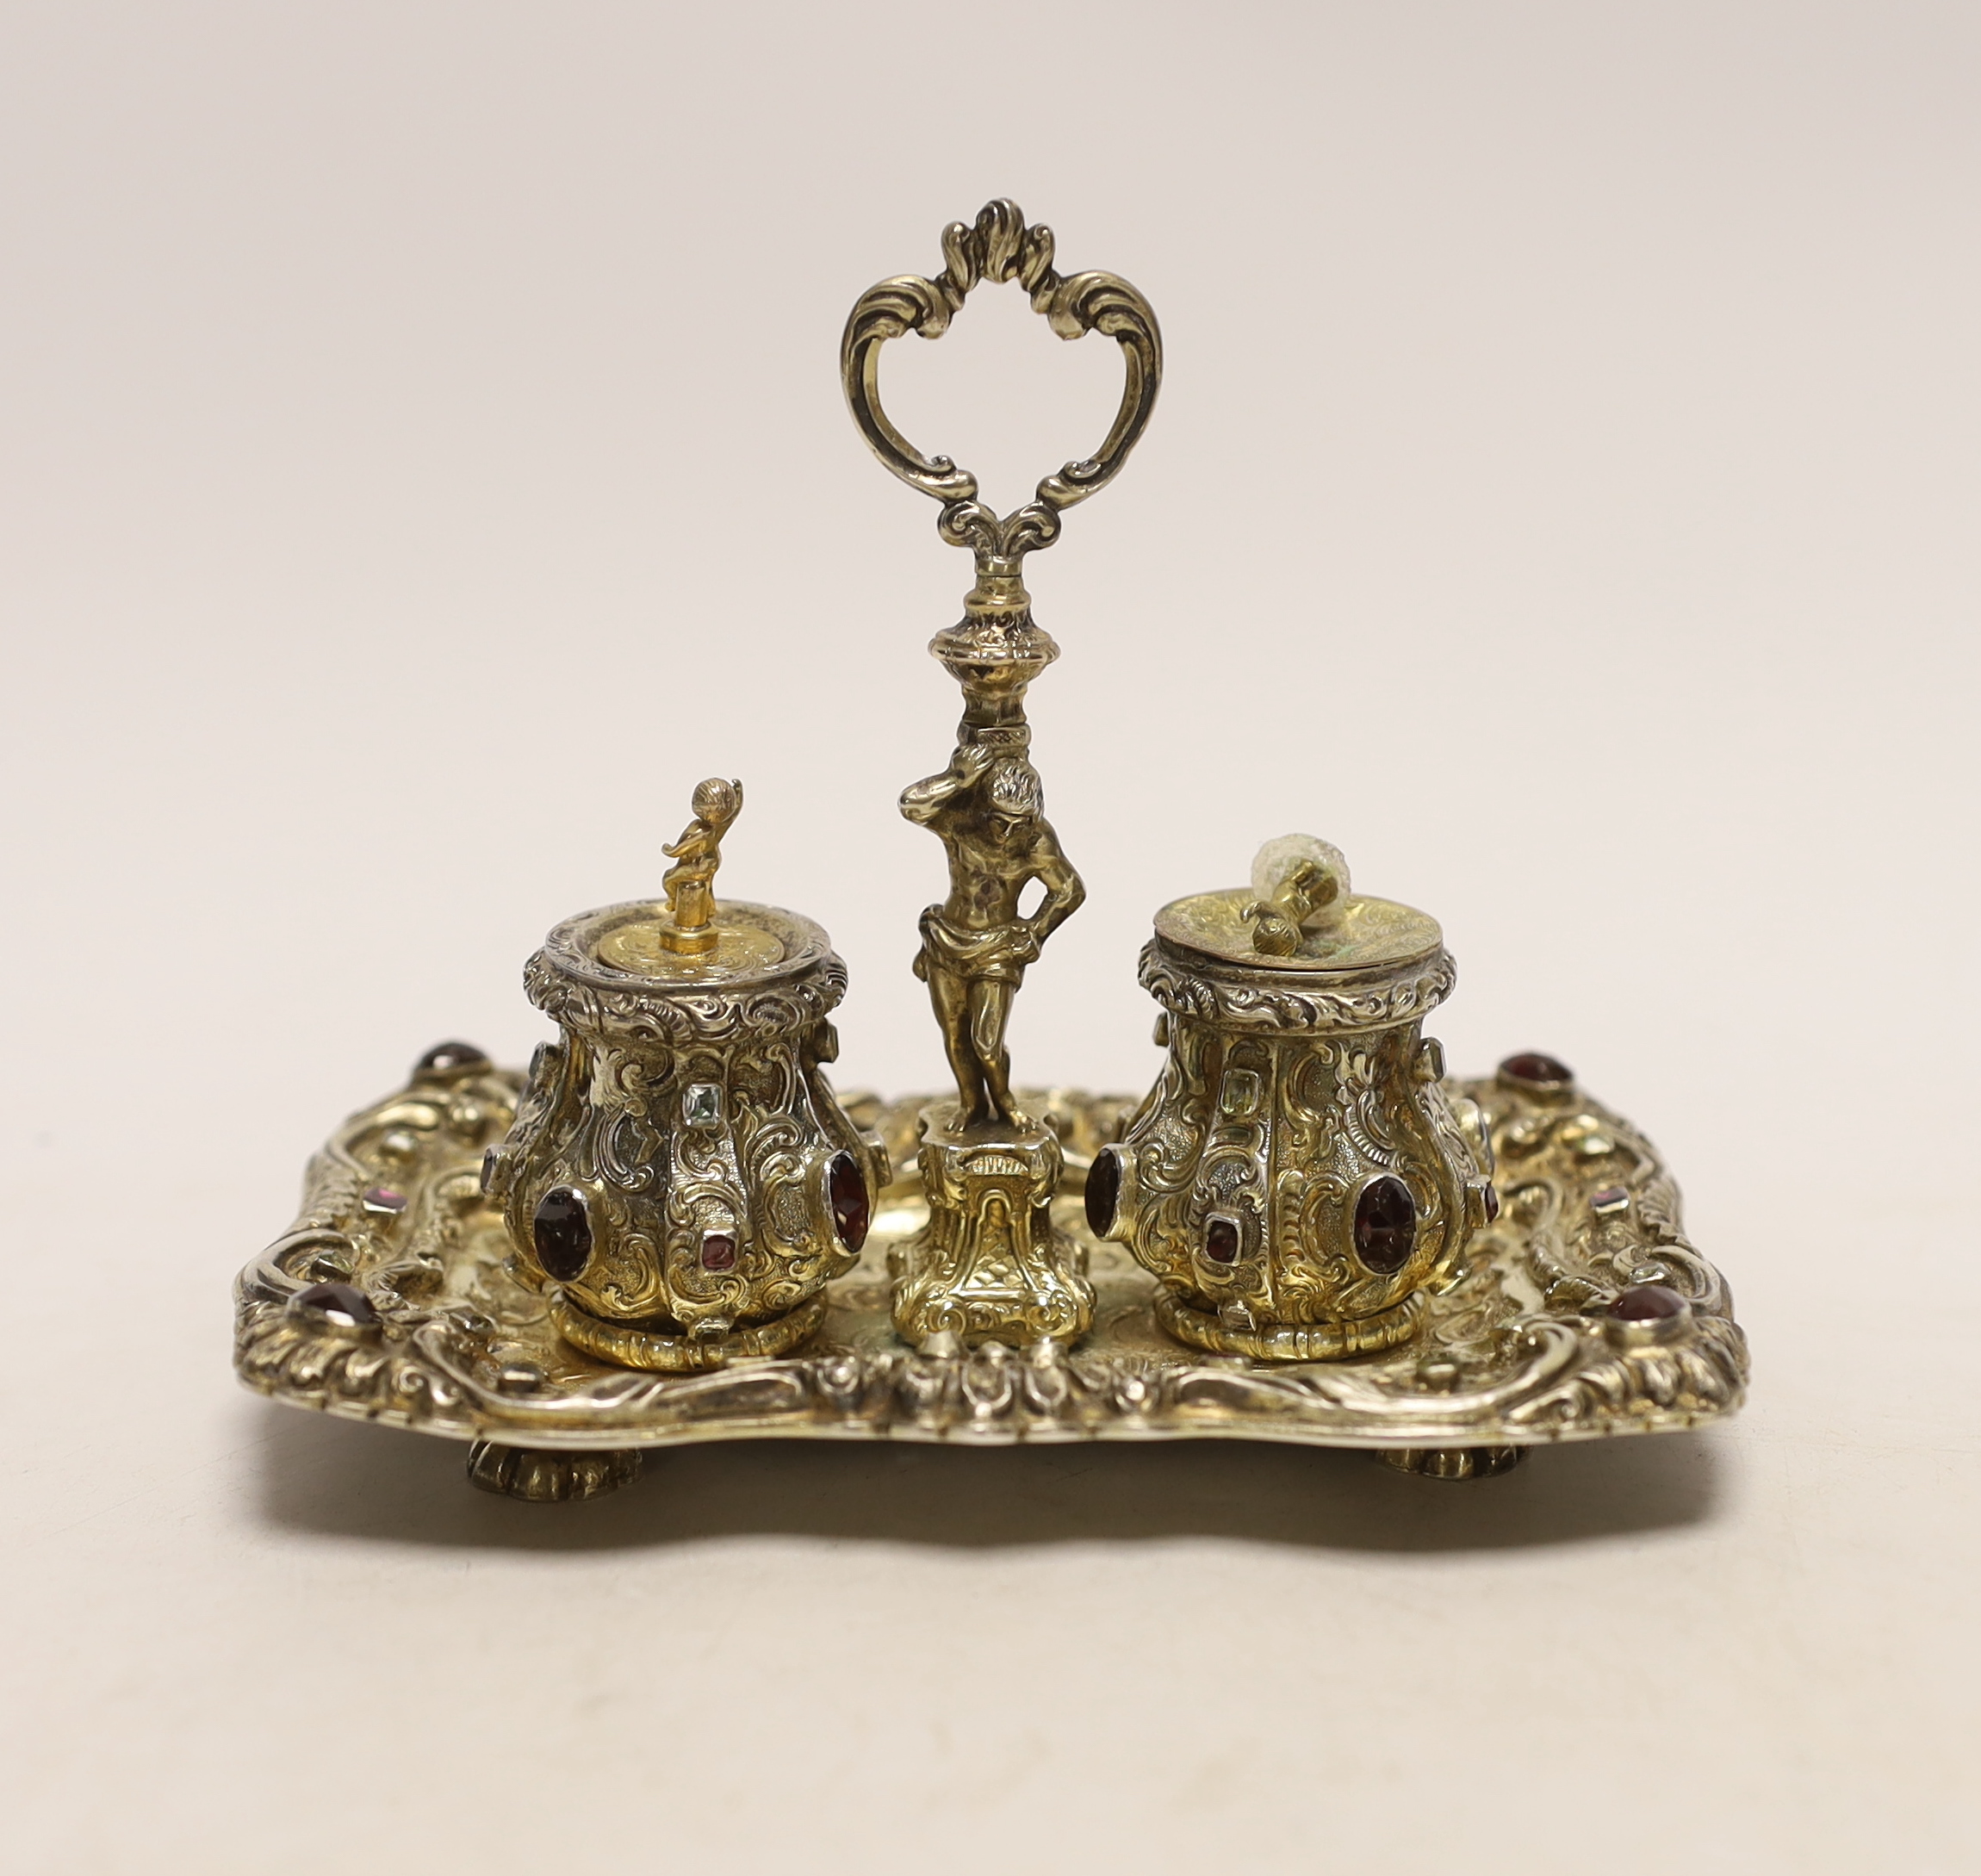 A 19th century Austrian embossed gilt white metal and multi gem set rectangular inkstand, with ring handle and two wells, 14.2cm, gross weight 6.3oz (a.f.).